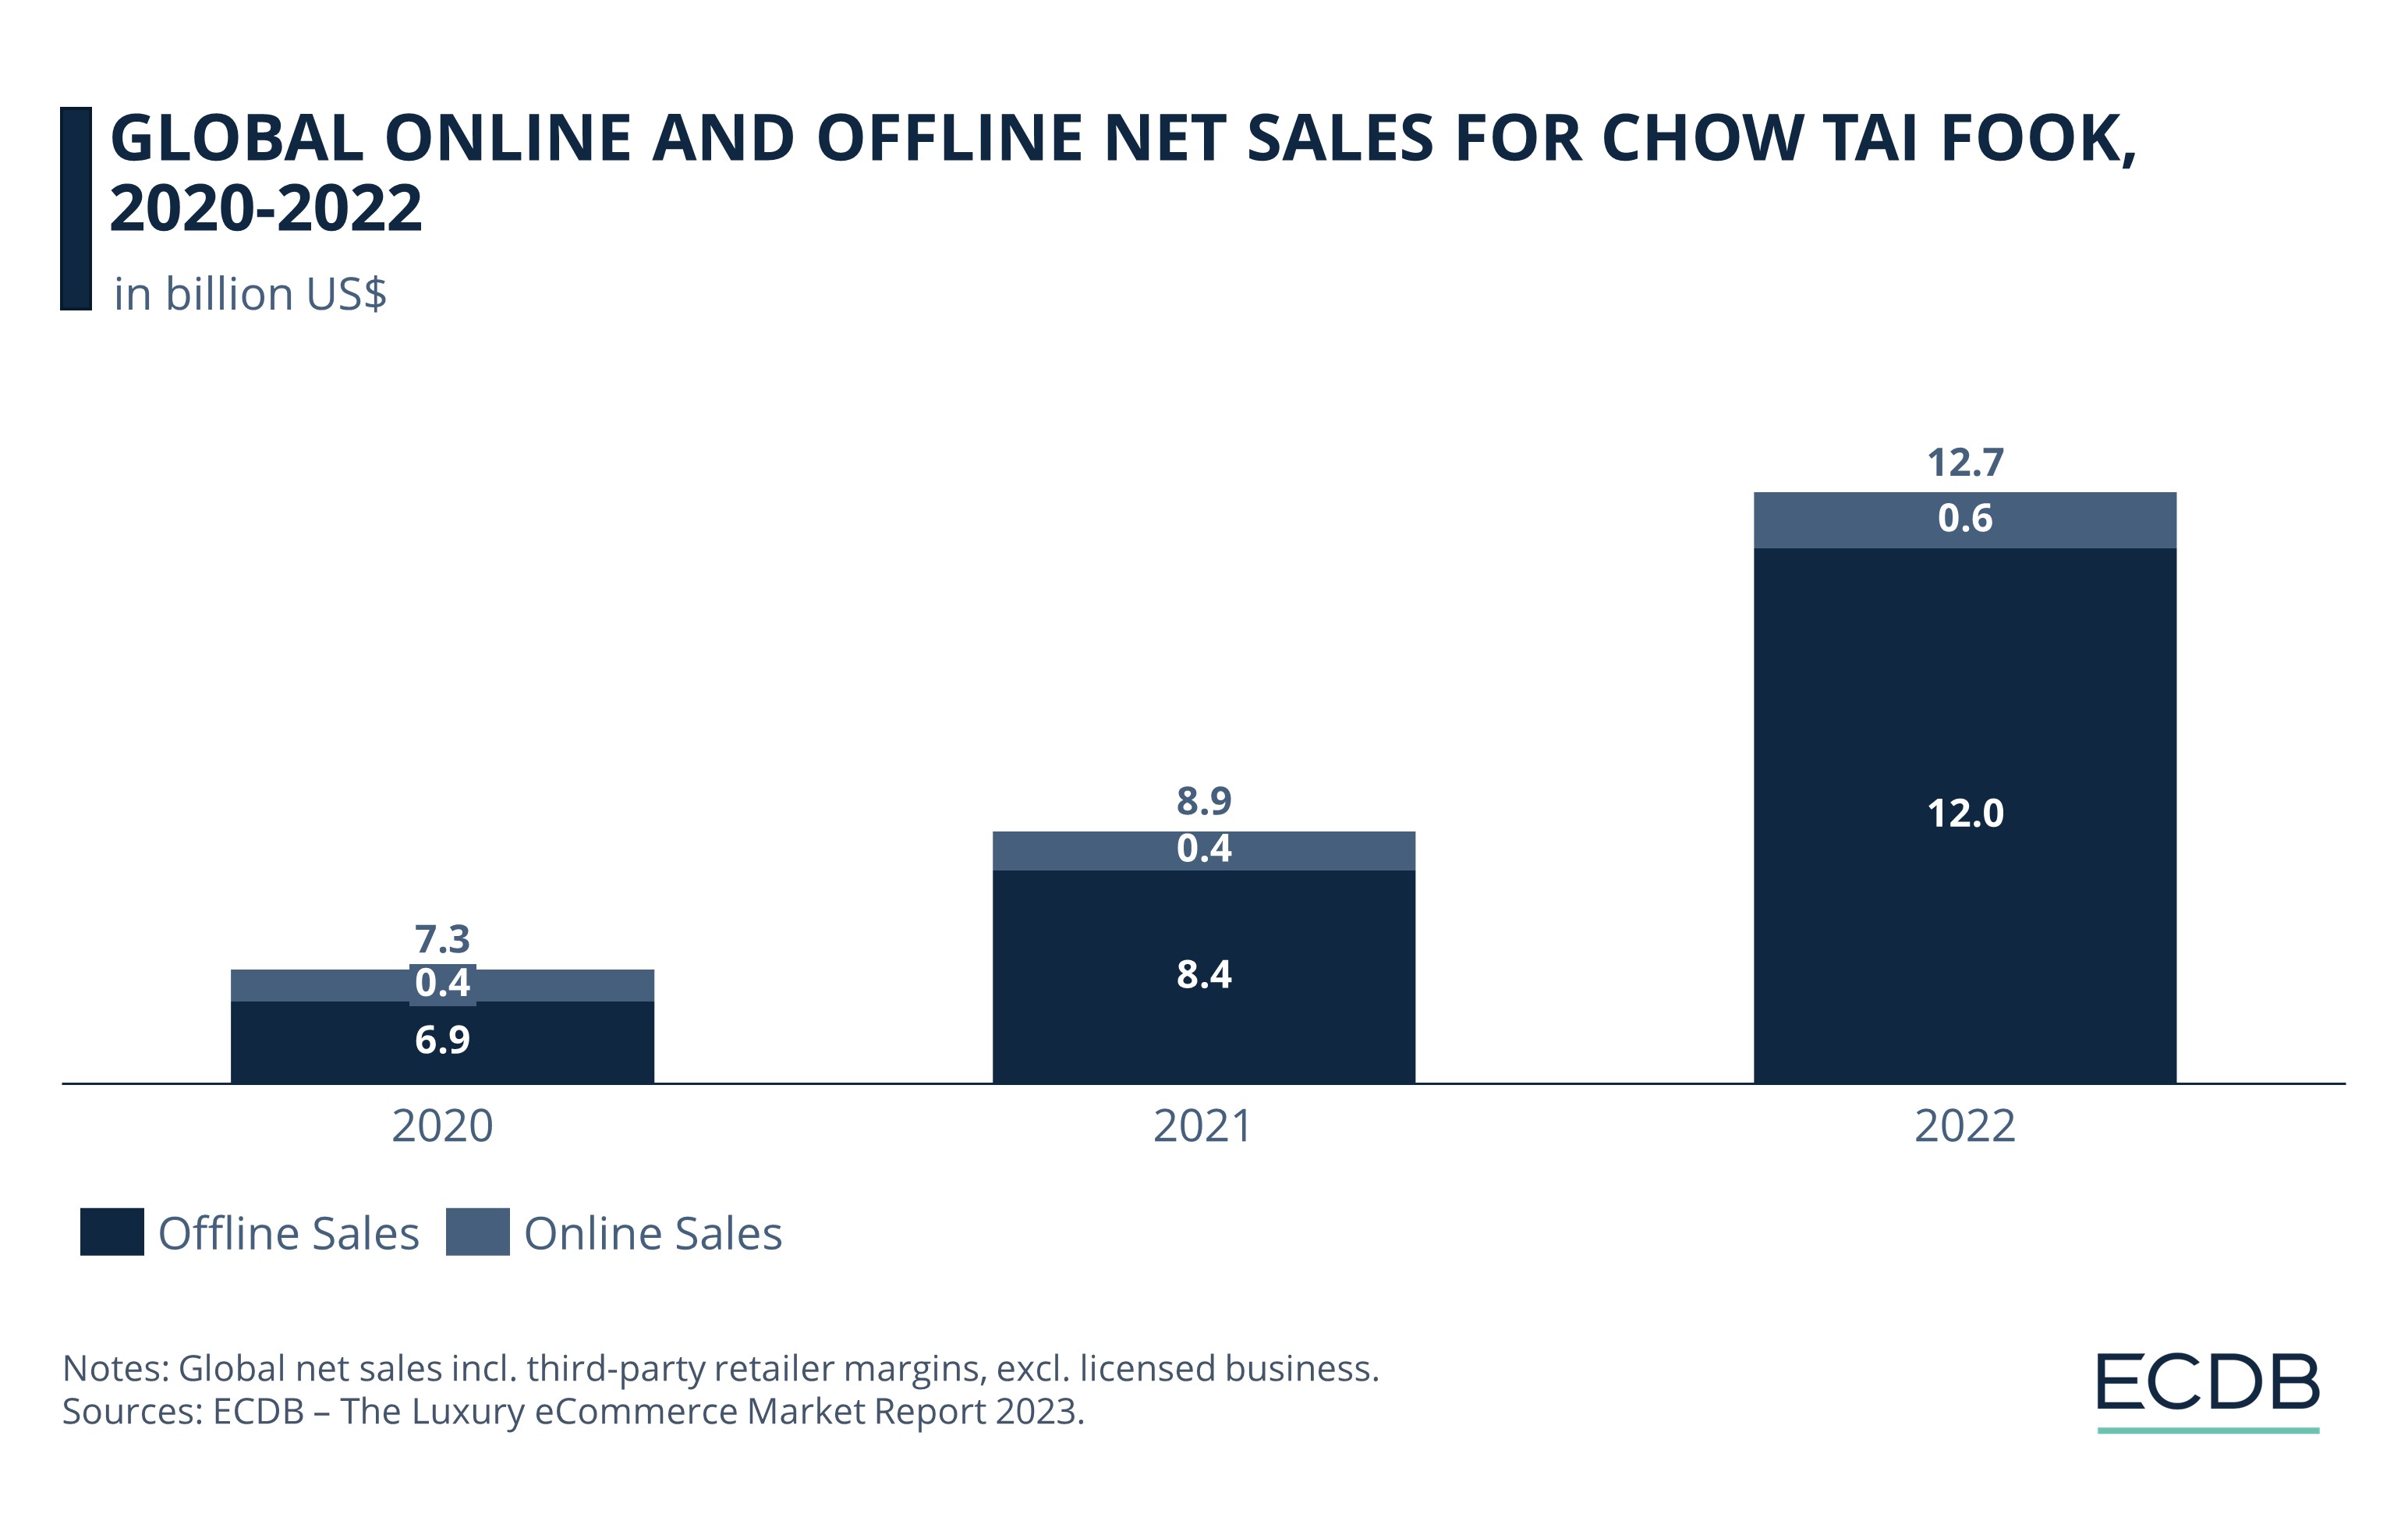 Global Online and Offline Net Sales for Chow Tai Fook in 2020–2022